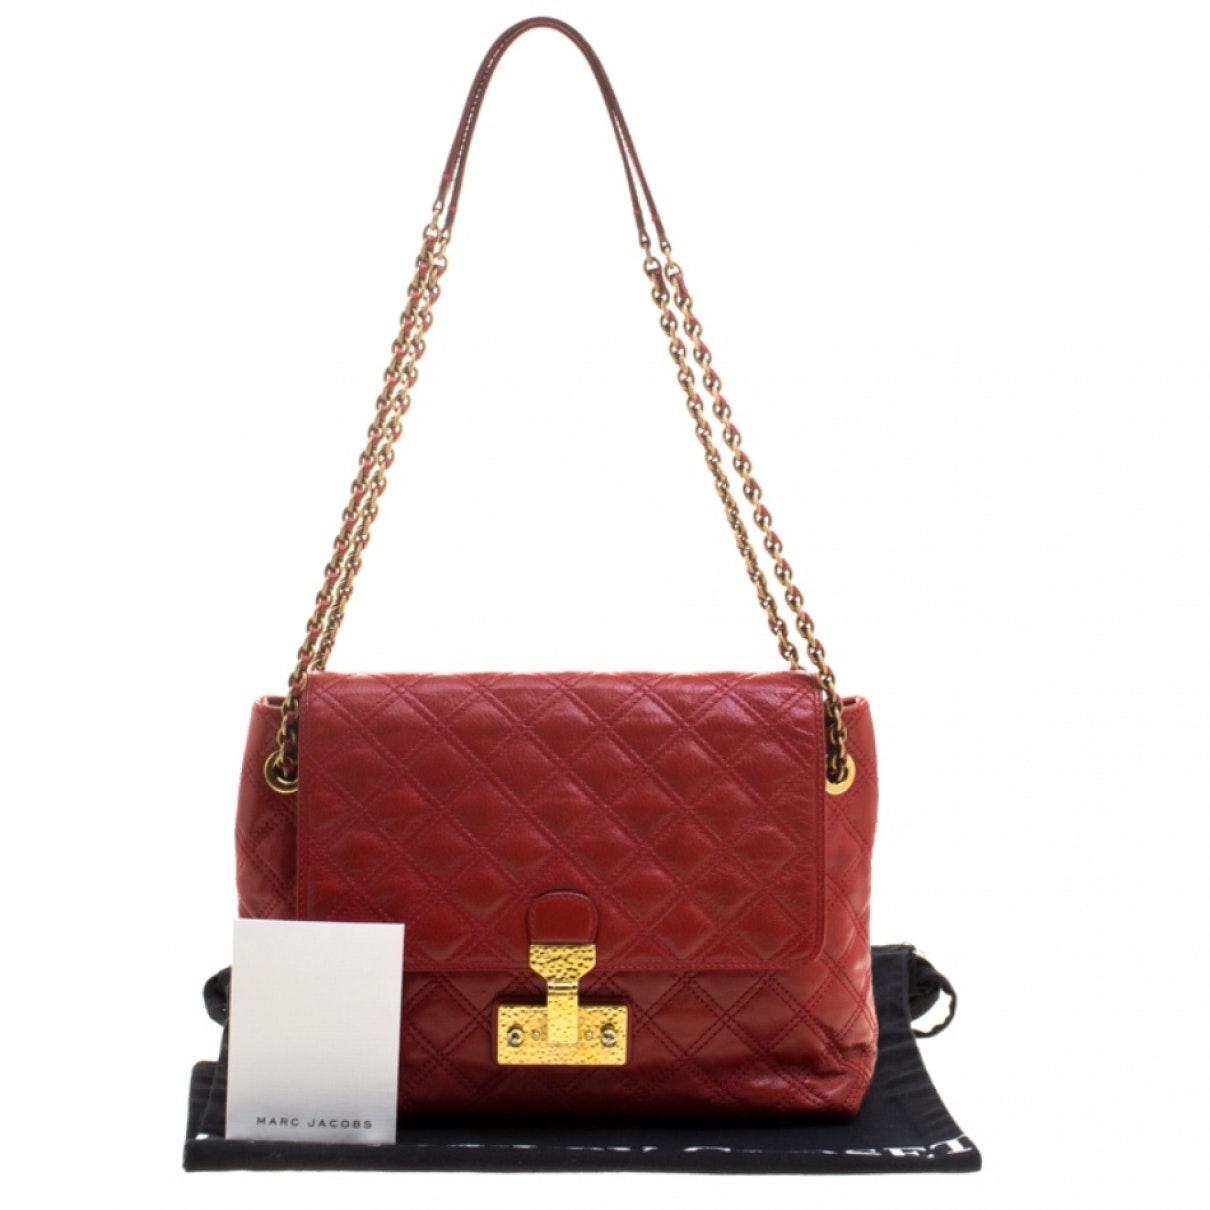 Marc Jacobs Red Leather Handbag - Lyst